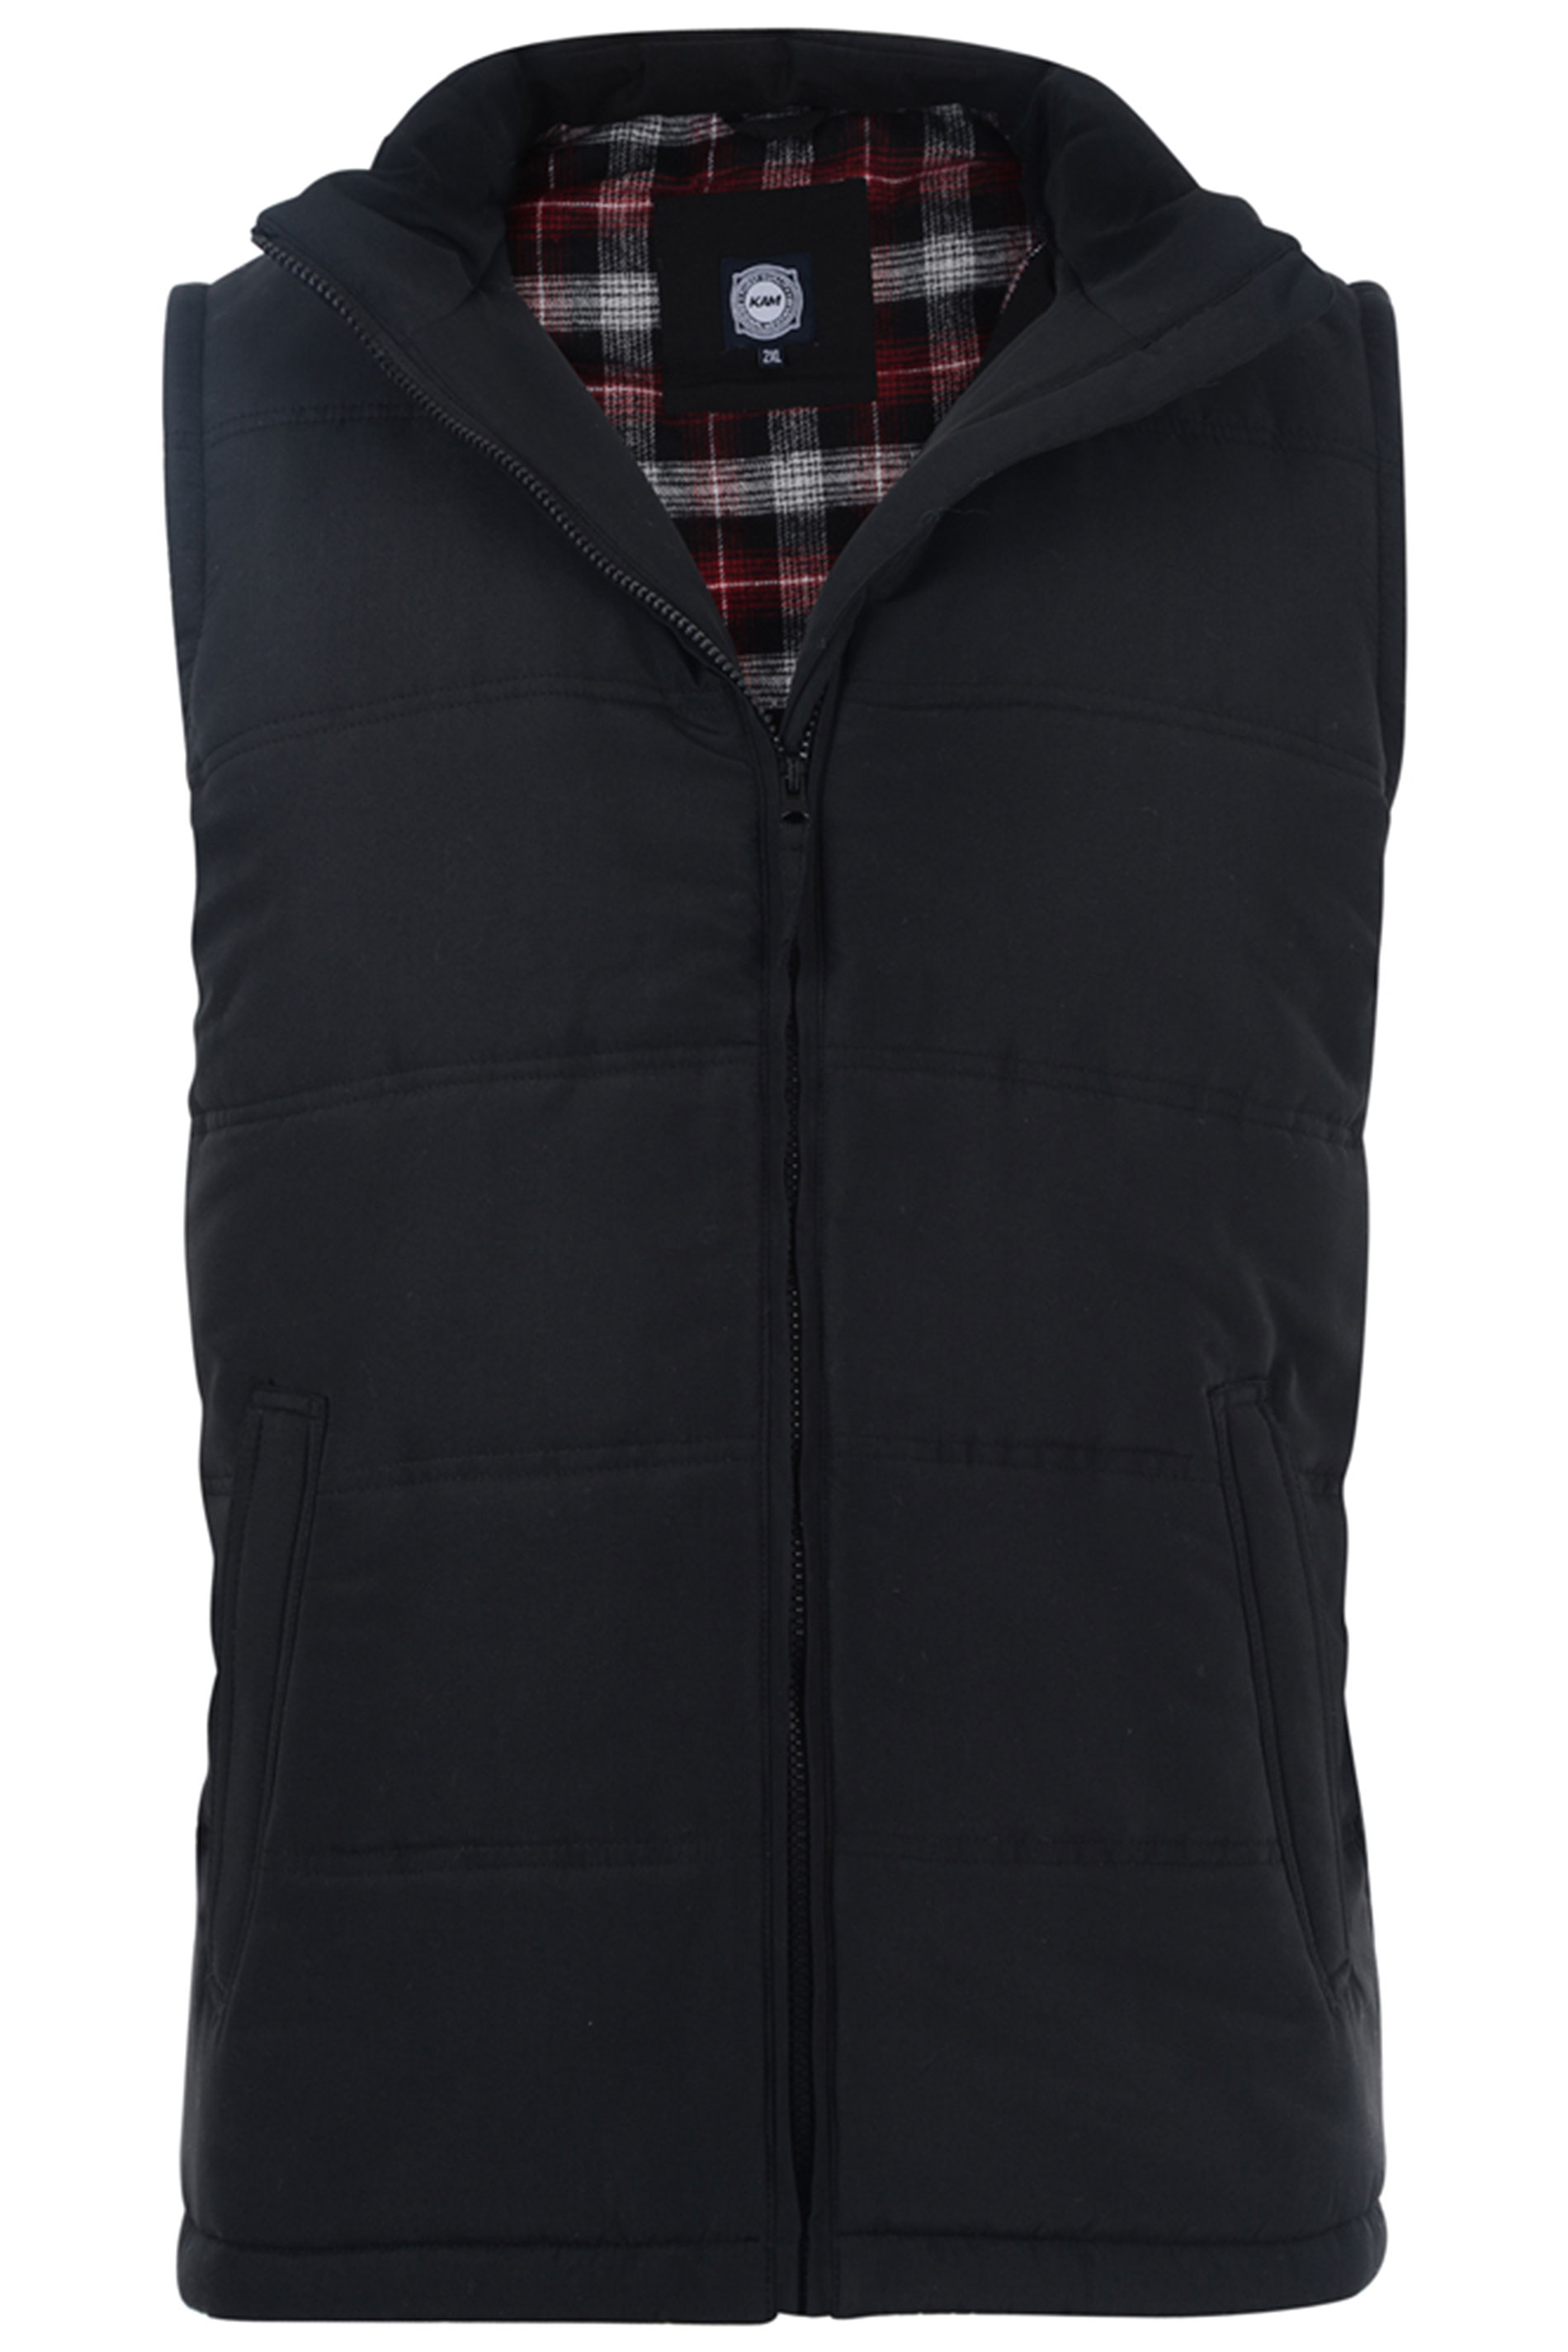 KAM Big & Tall Black Quilted Padded Gilet | BadRhino 2